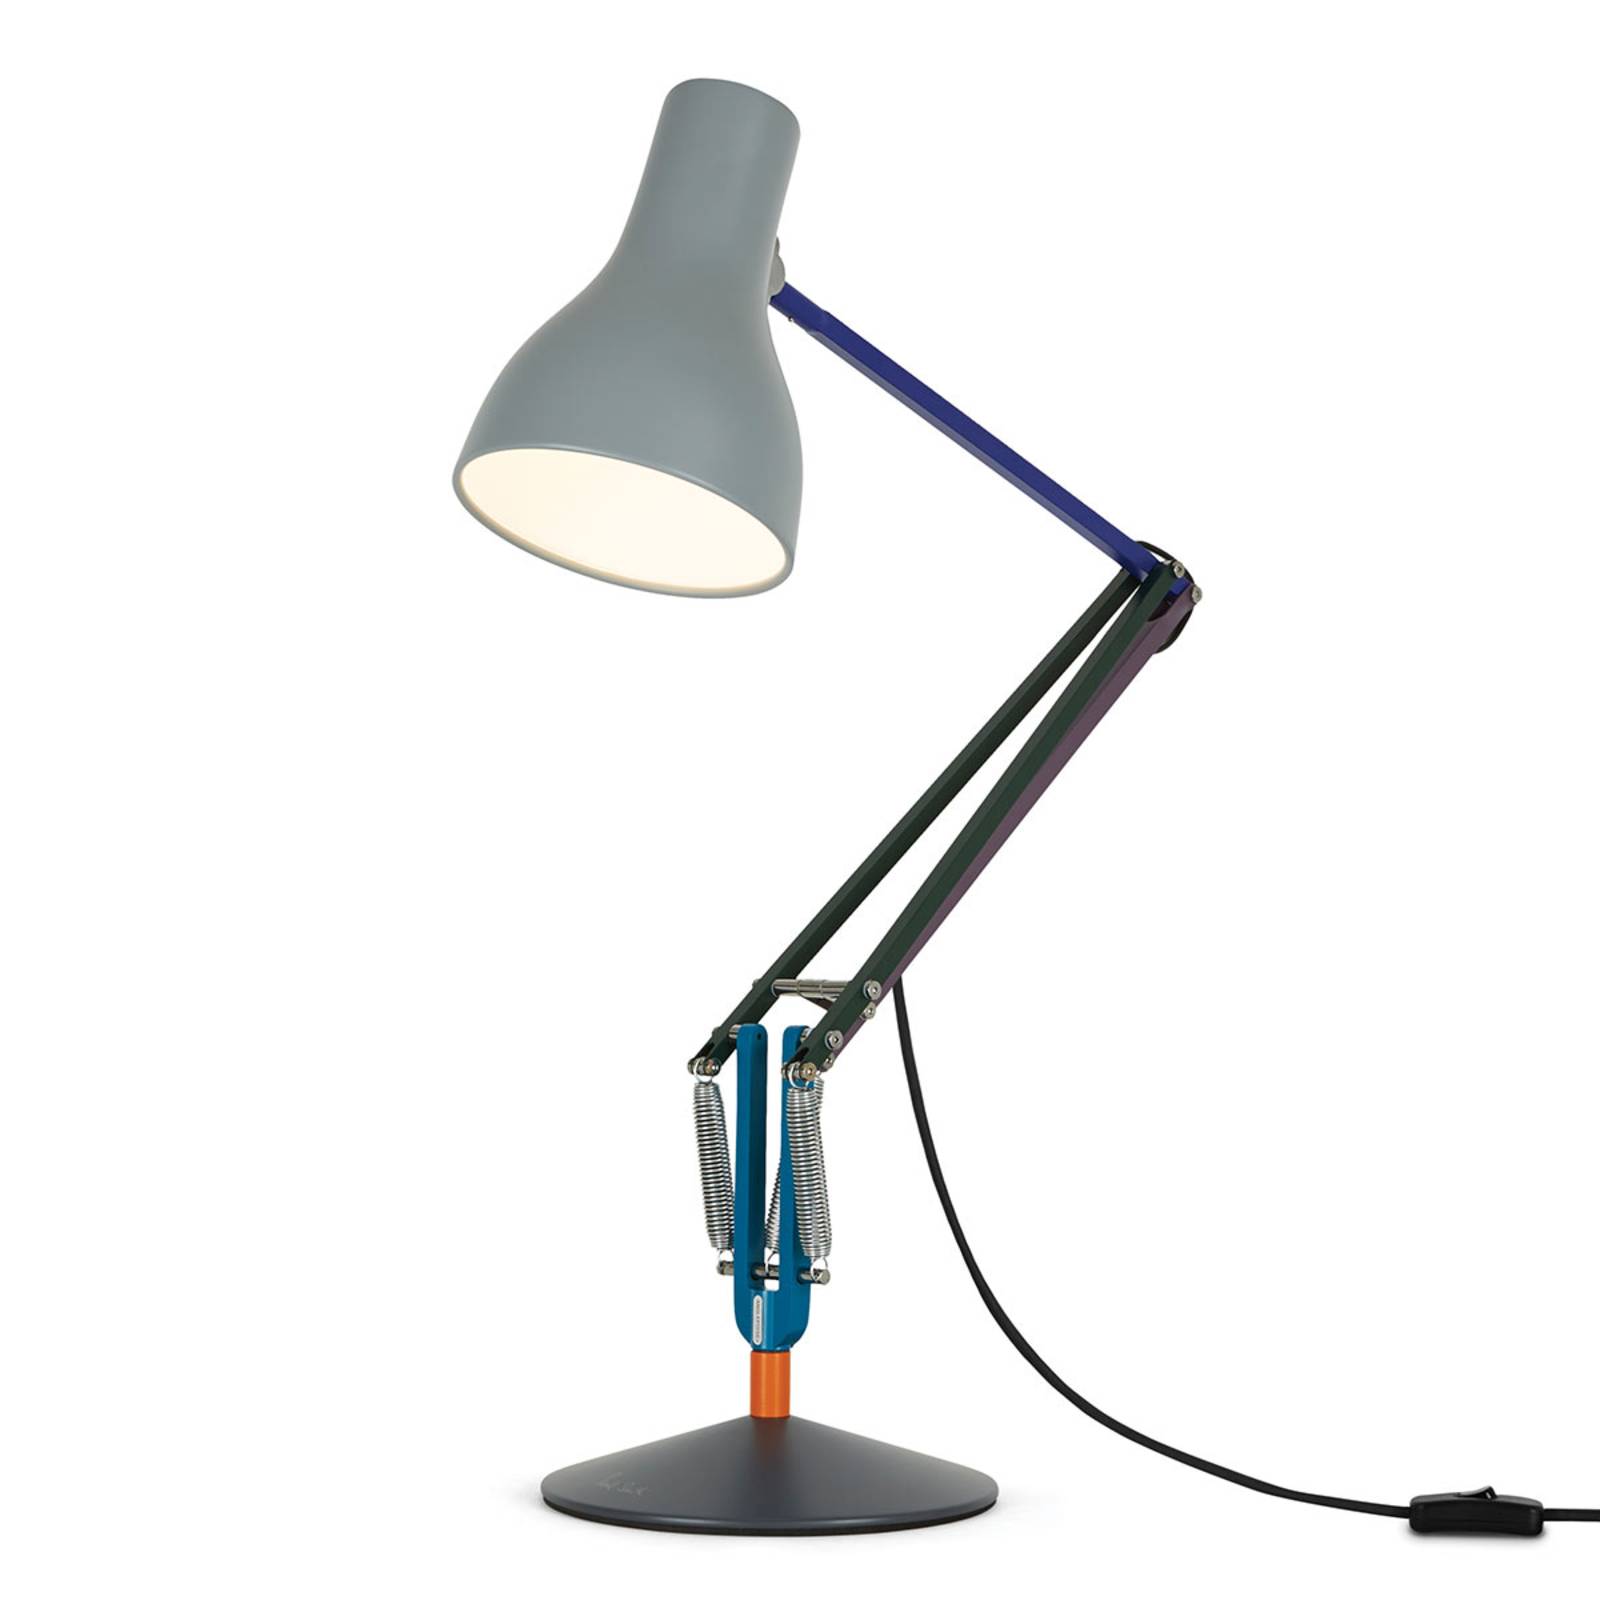 Anglepoise Type 75 Tischlampe Paul Smith Edition 2 von Anglepoise